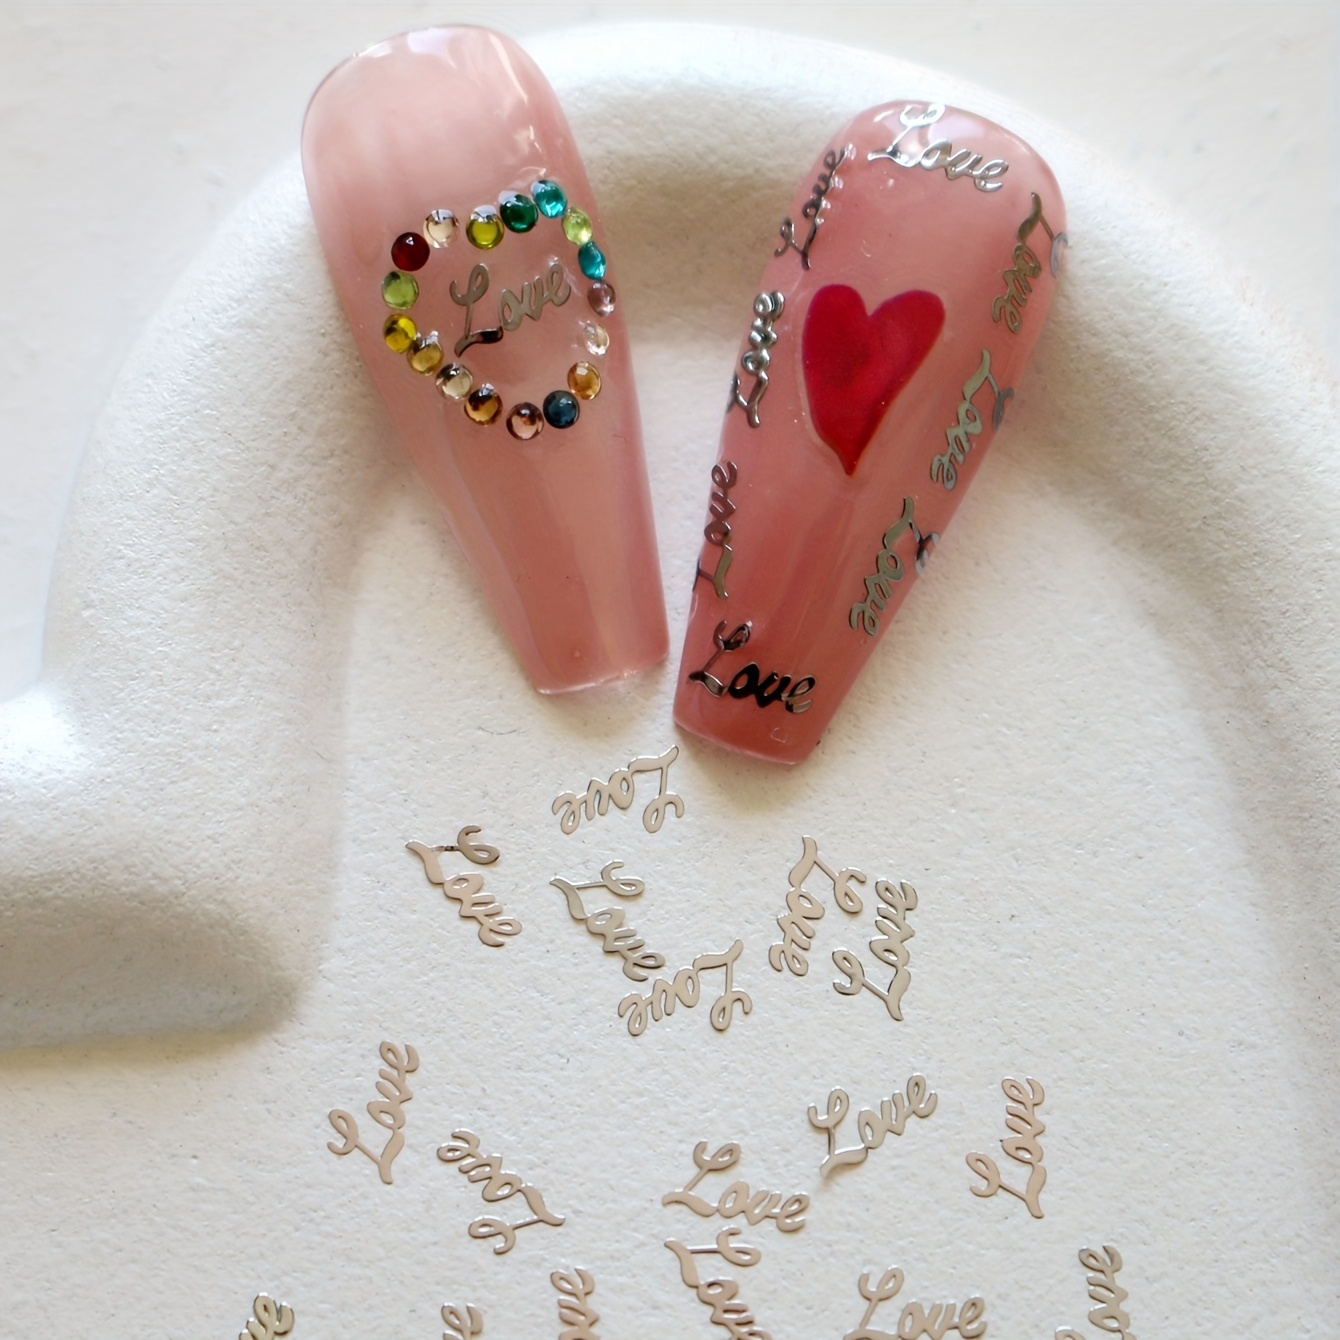 LOVE HEART GOLD METAL CHARMS VALENTINE NAILS 3D NAIL ART SMALL